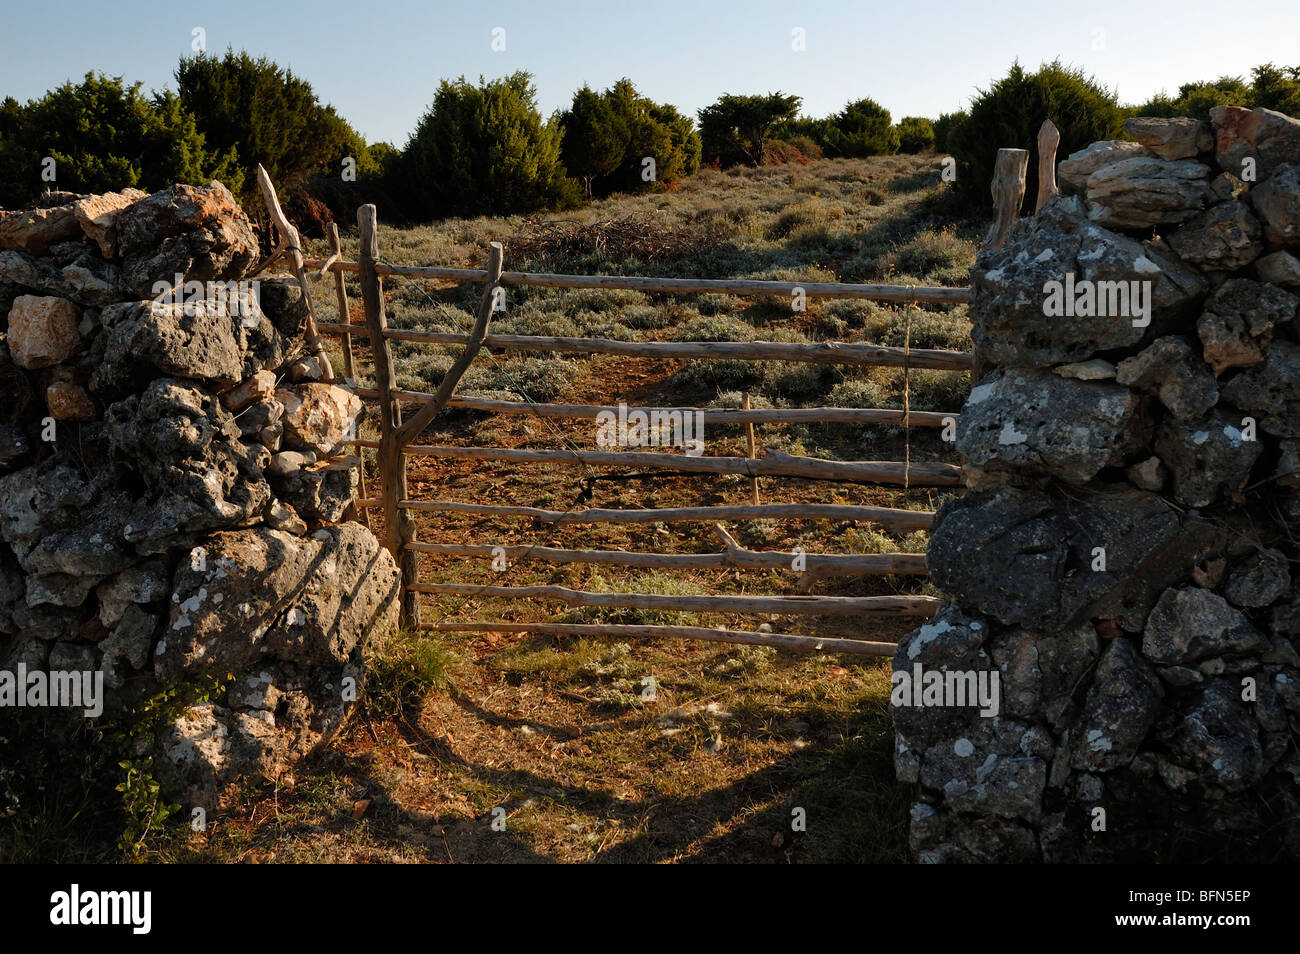 Island Cres, Croatia, traditional wooden gate in drystone wall, closed Stock Photo